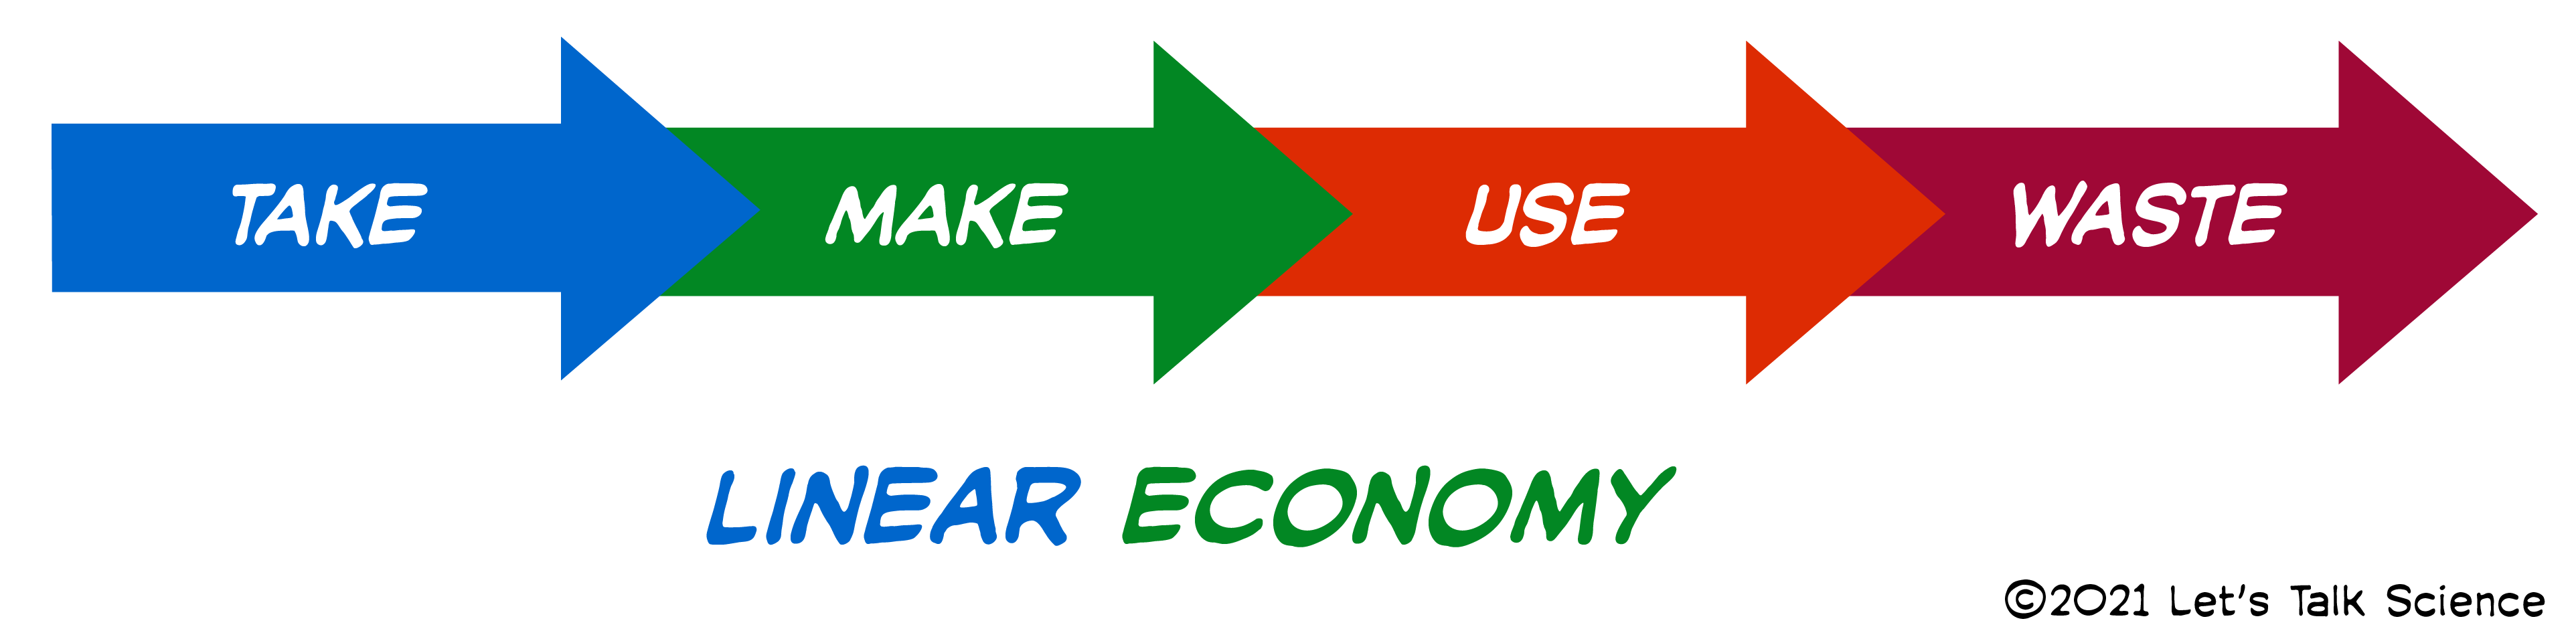 A linear economy follows a pattern in which people take, make, use, and waste